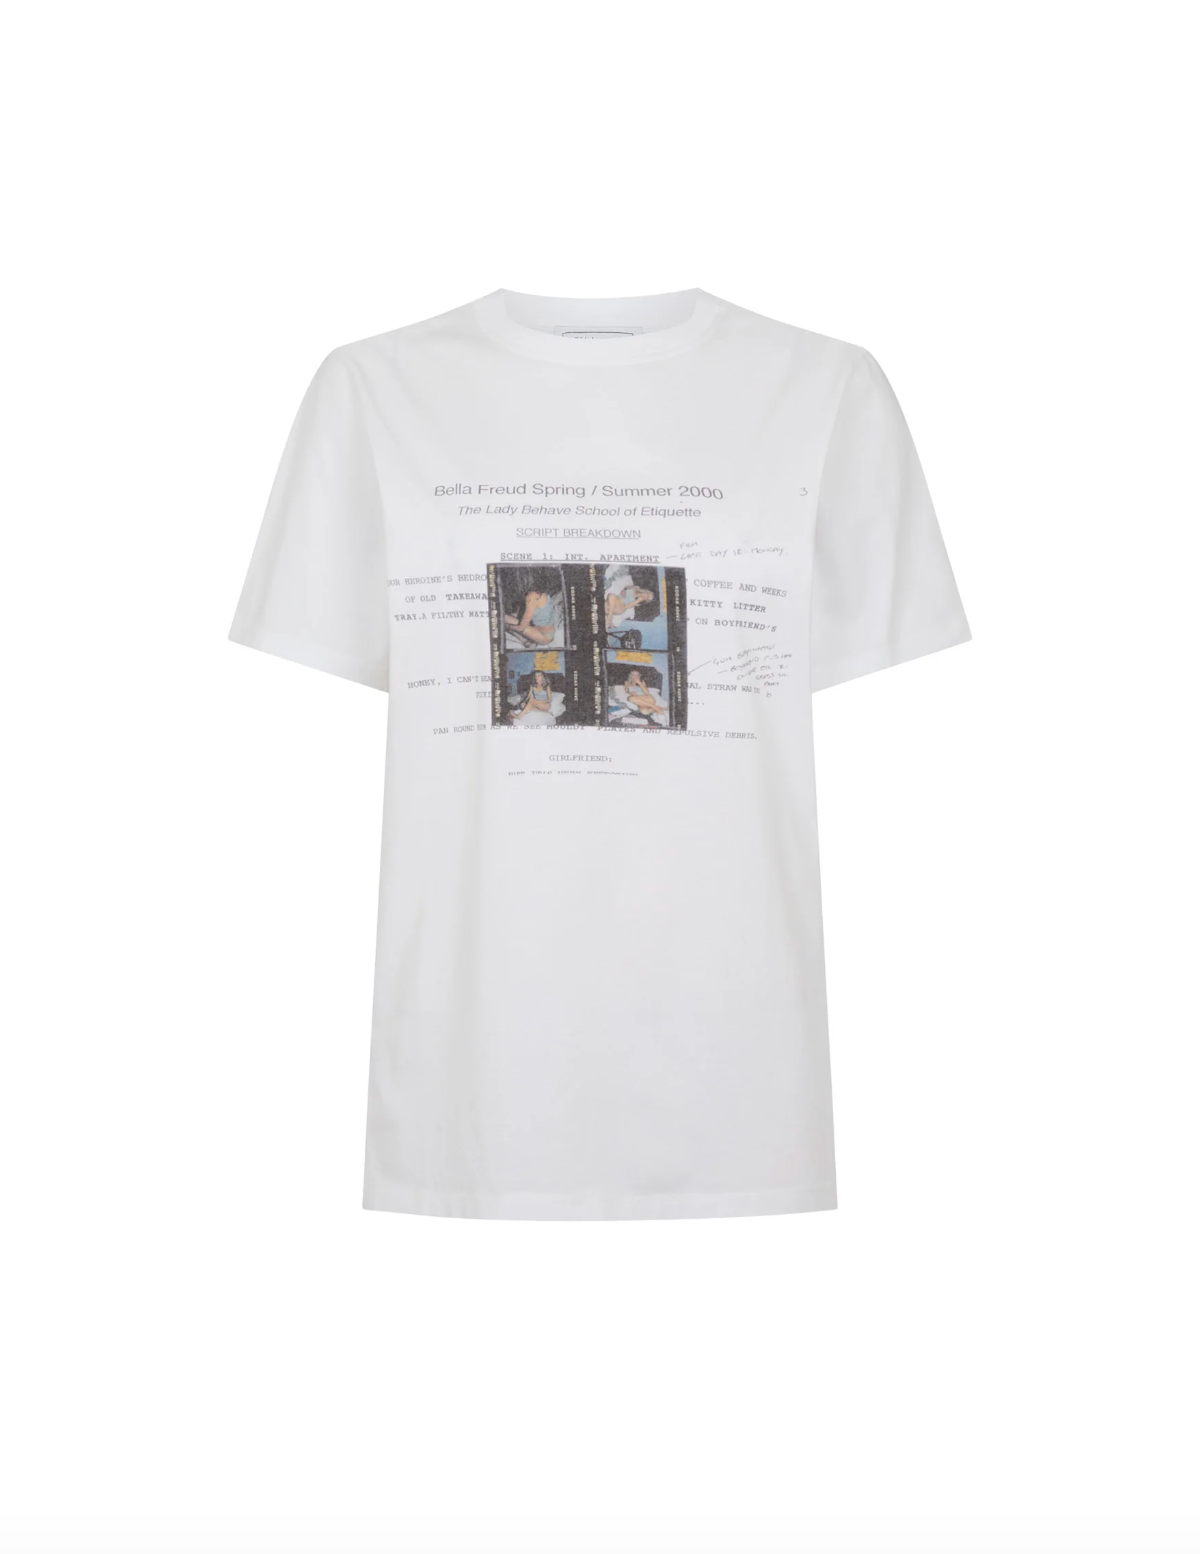 Lady Behave White T-Shirt